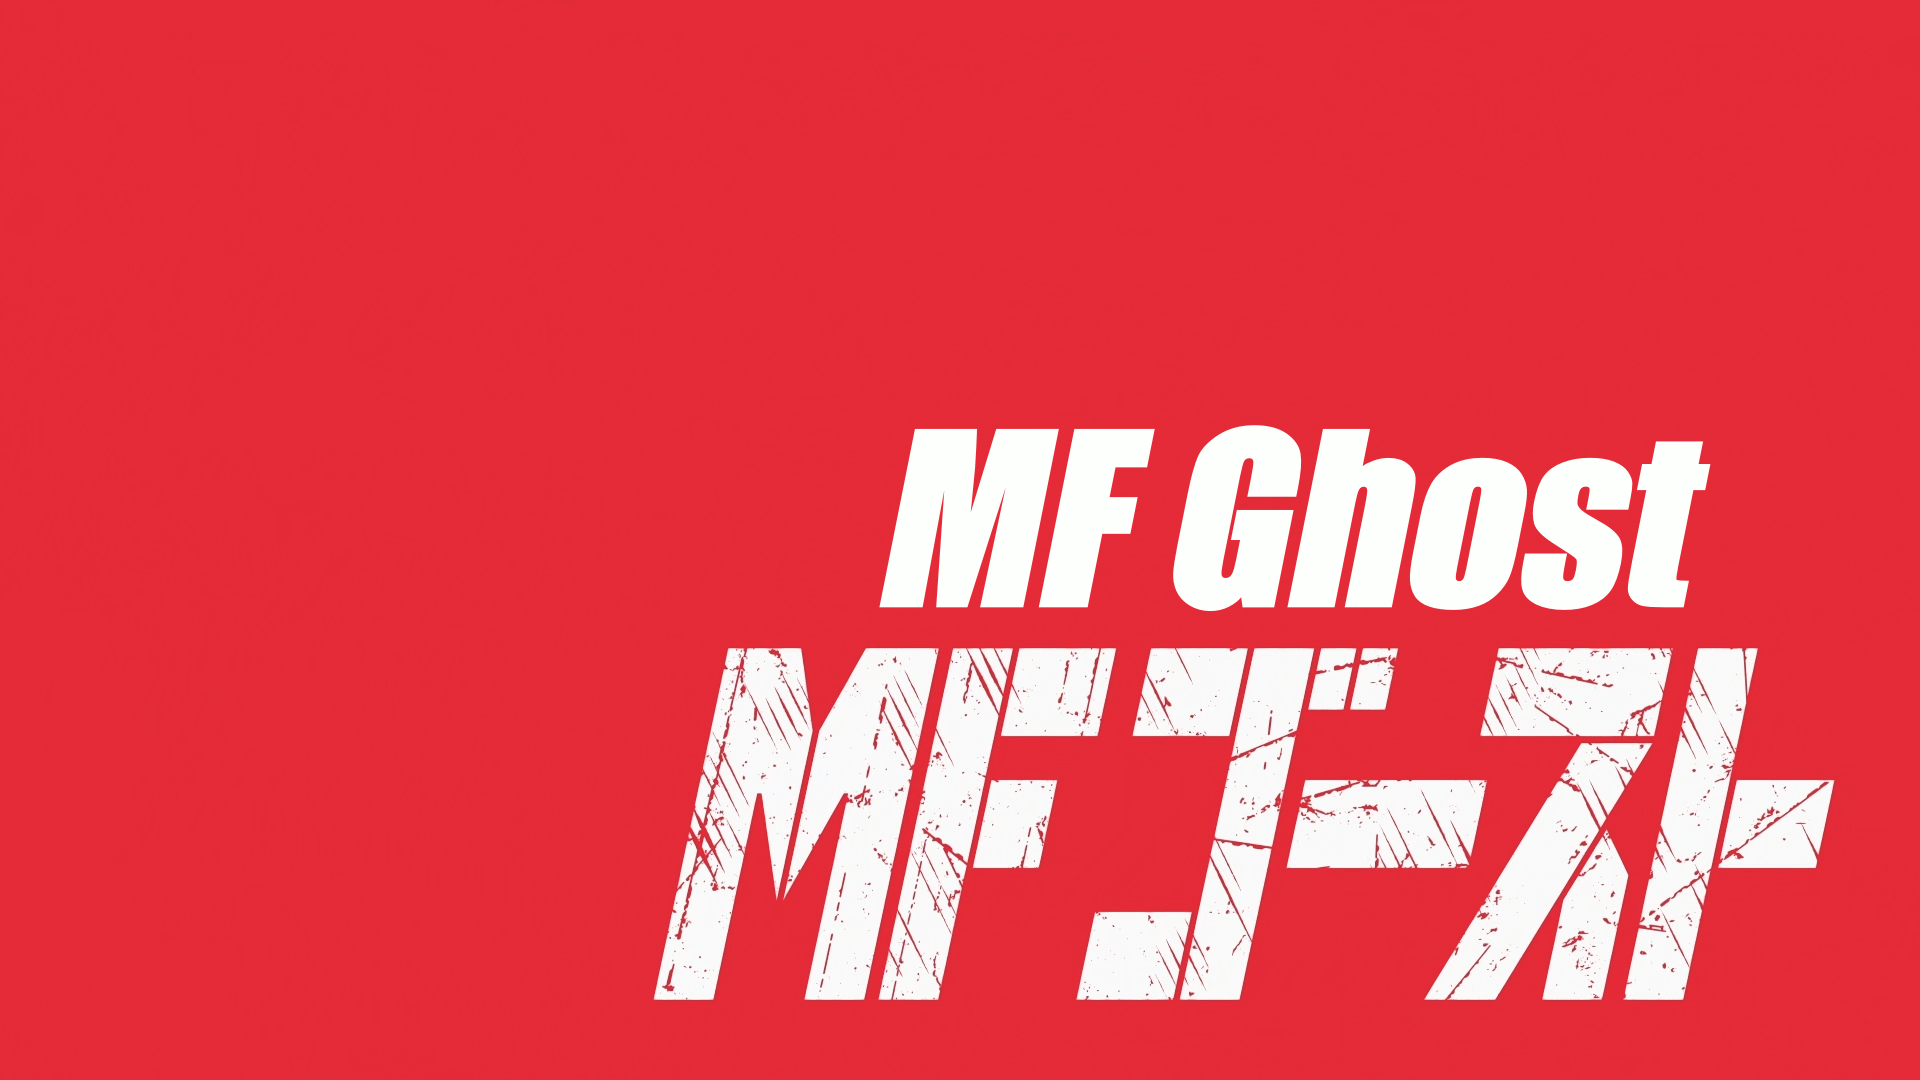 MF Ghost Anime: Wiki-Plot, Release Date, & Where To Watch